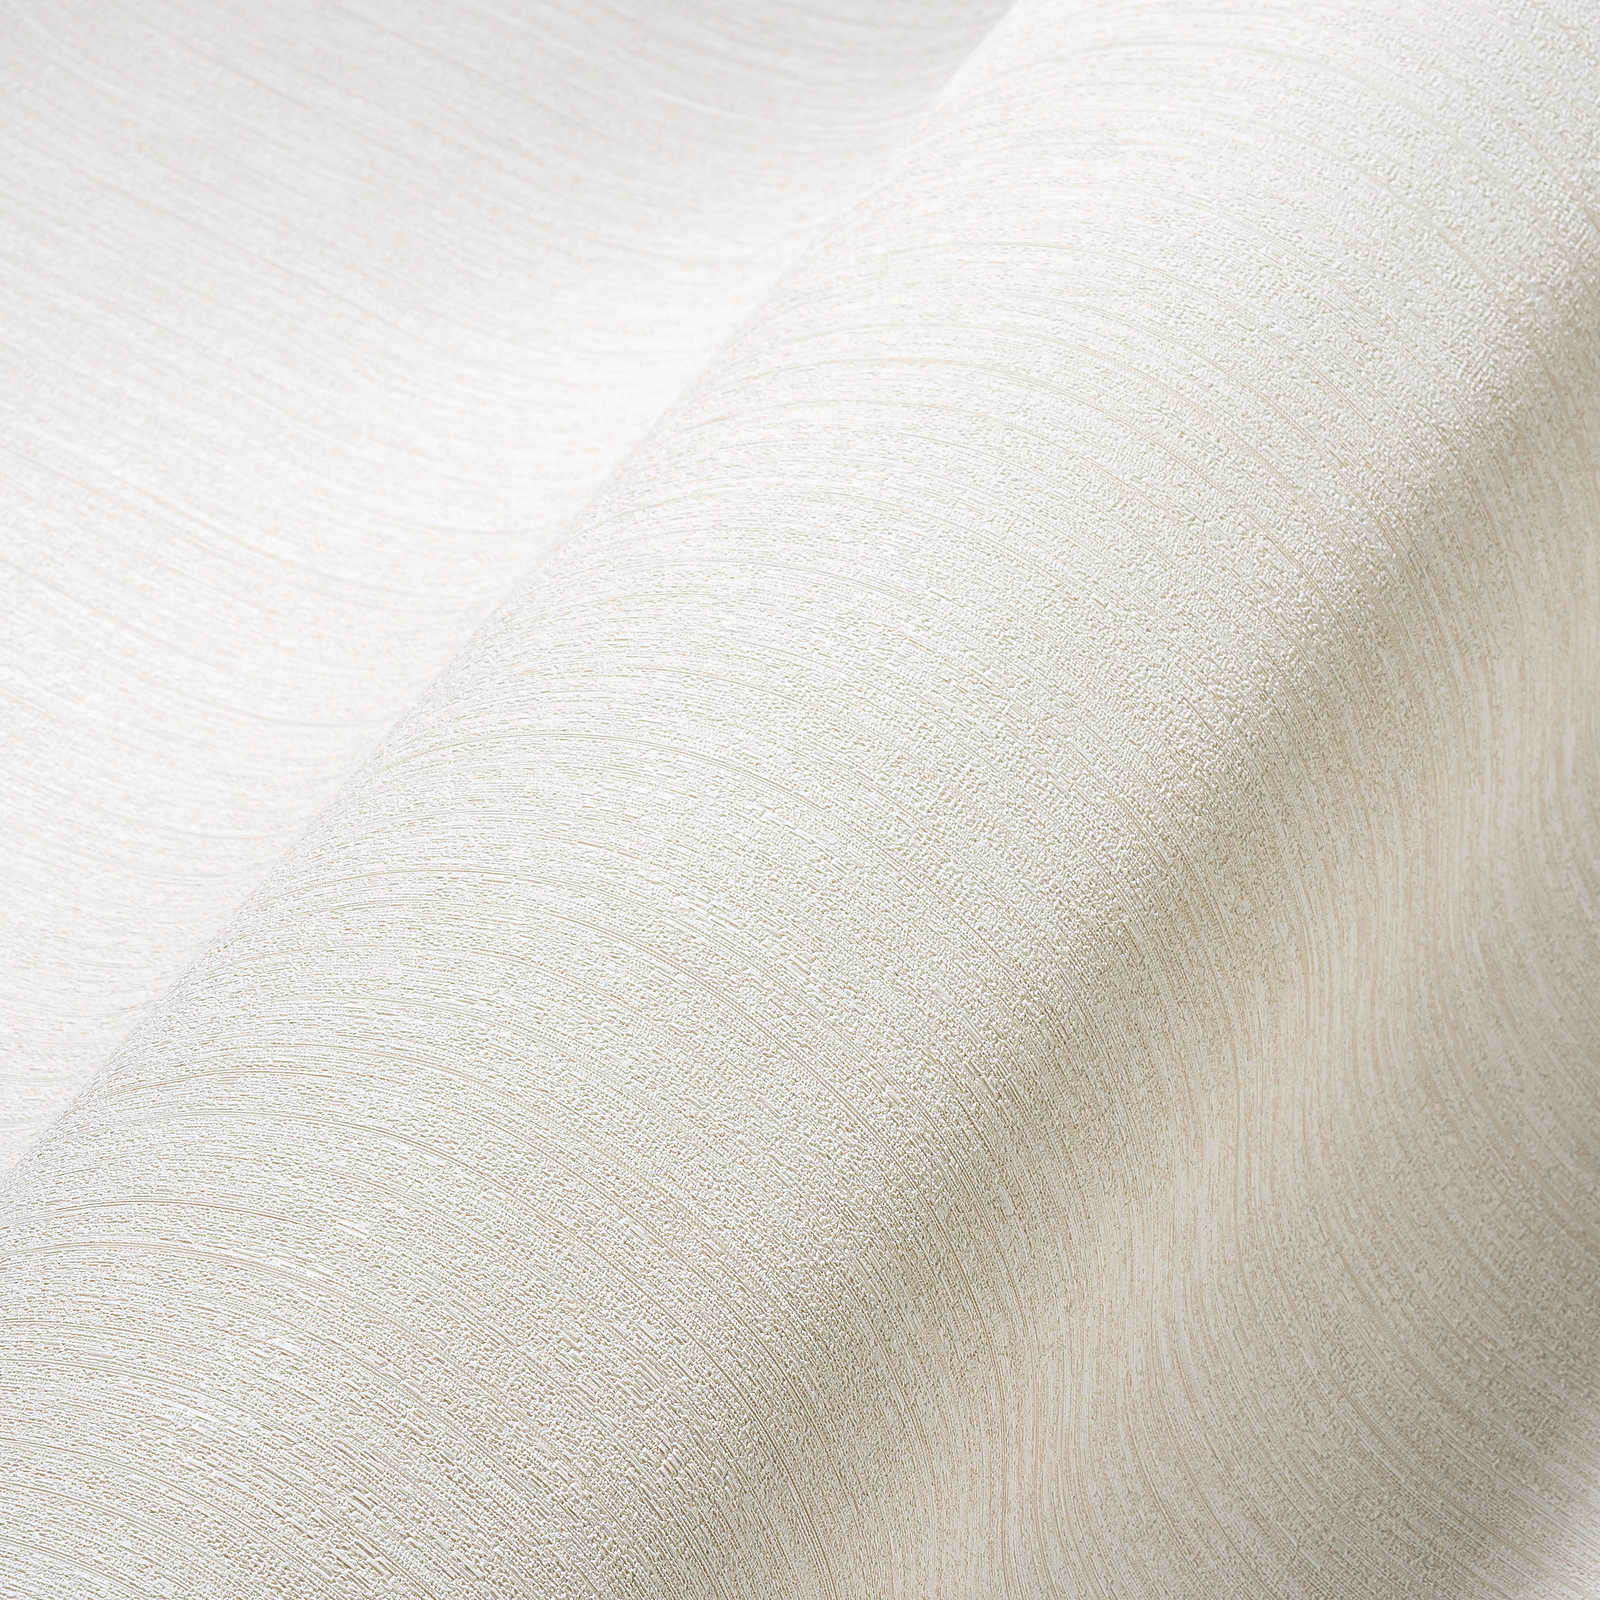             Cream white wallpaper satin with natural texture effect
        